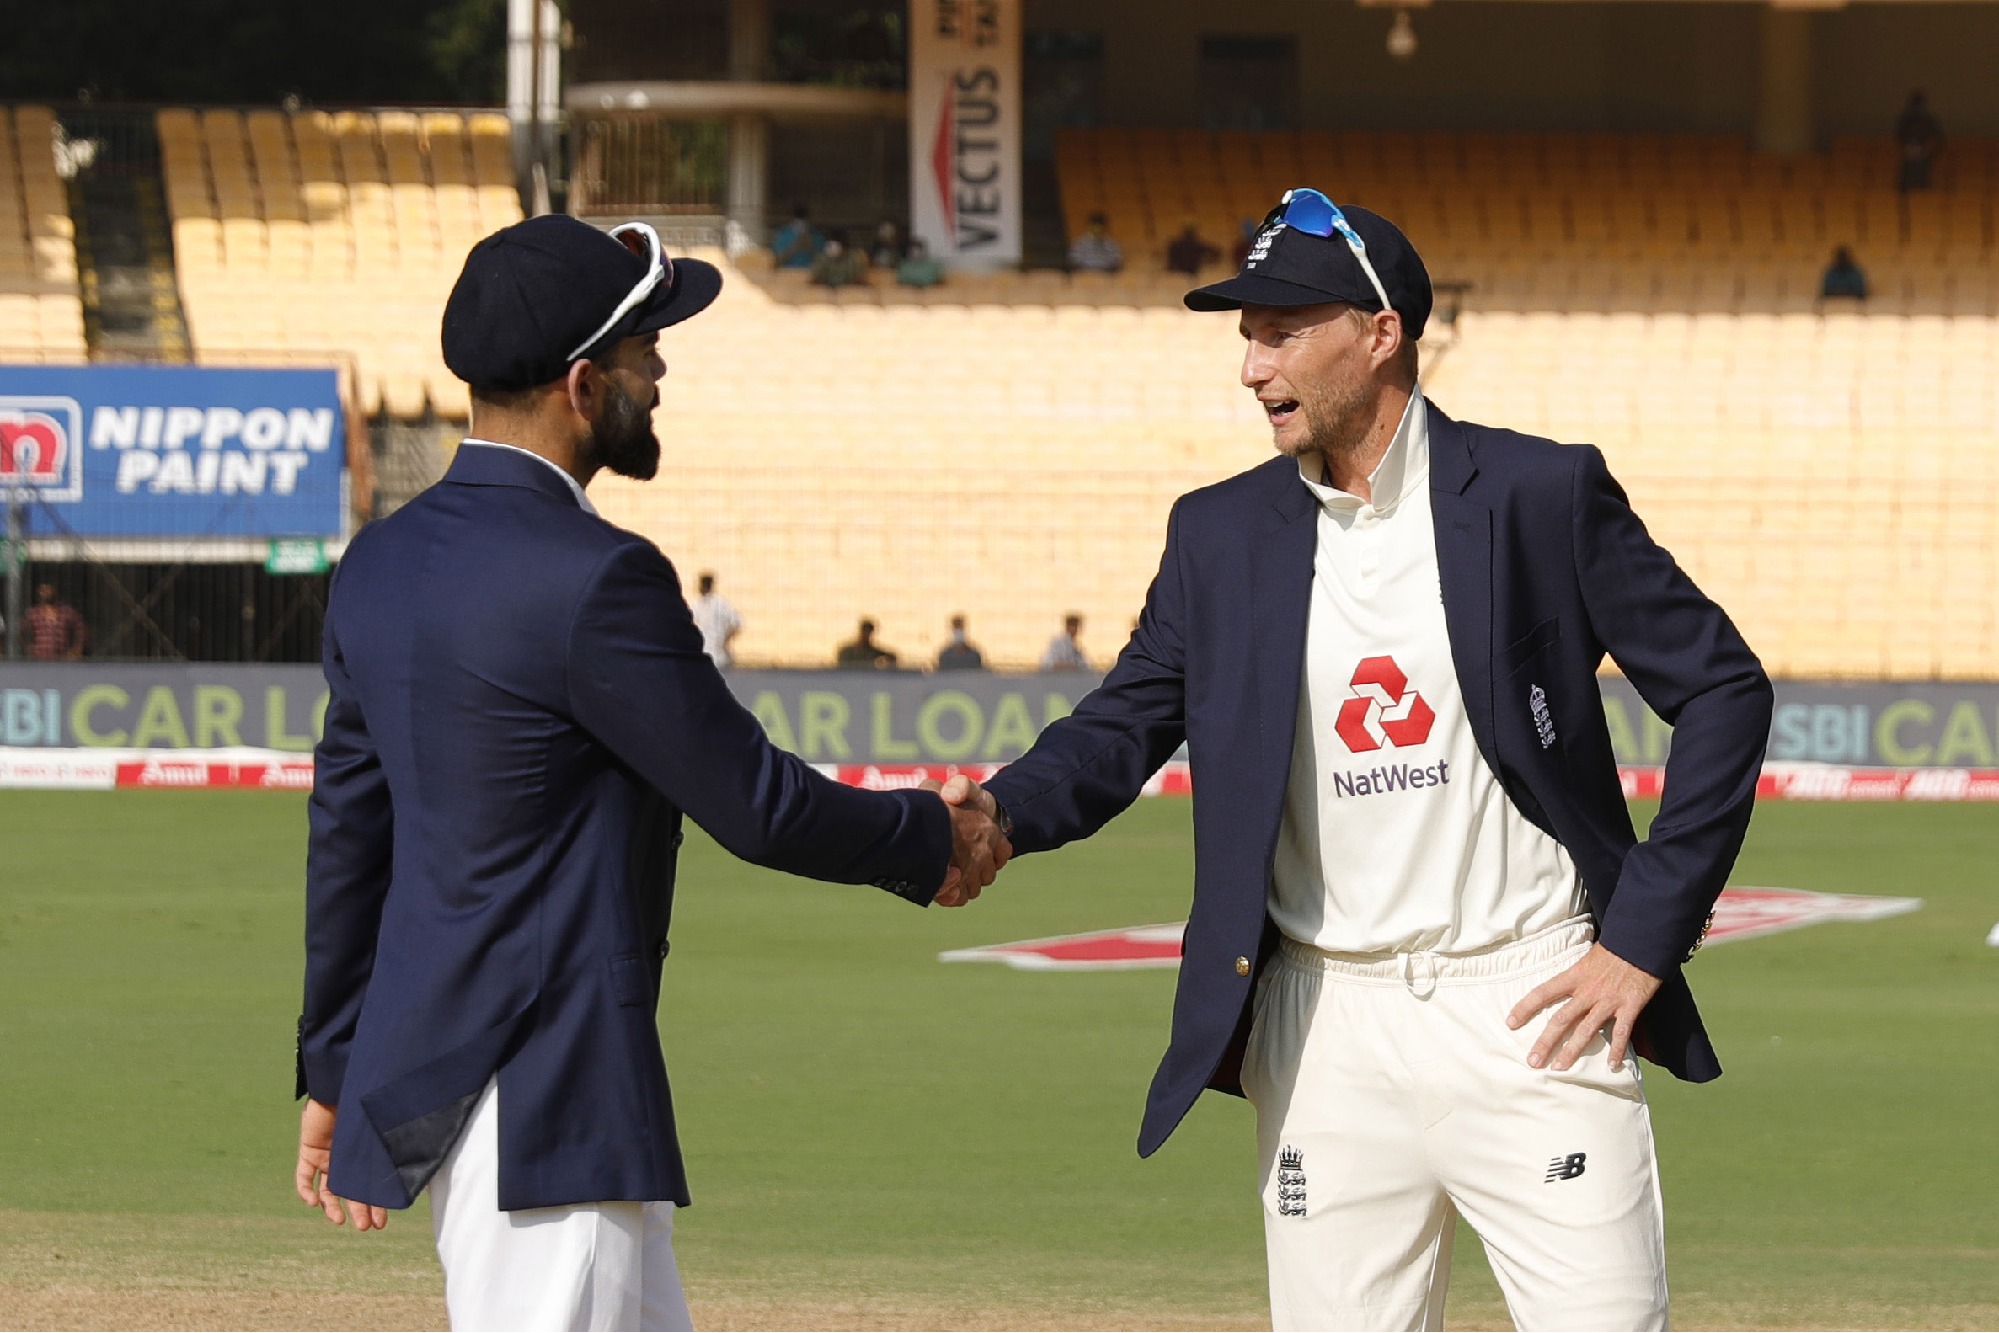 Kohli won  The Toss and Elected To Bat first